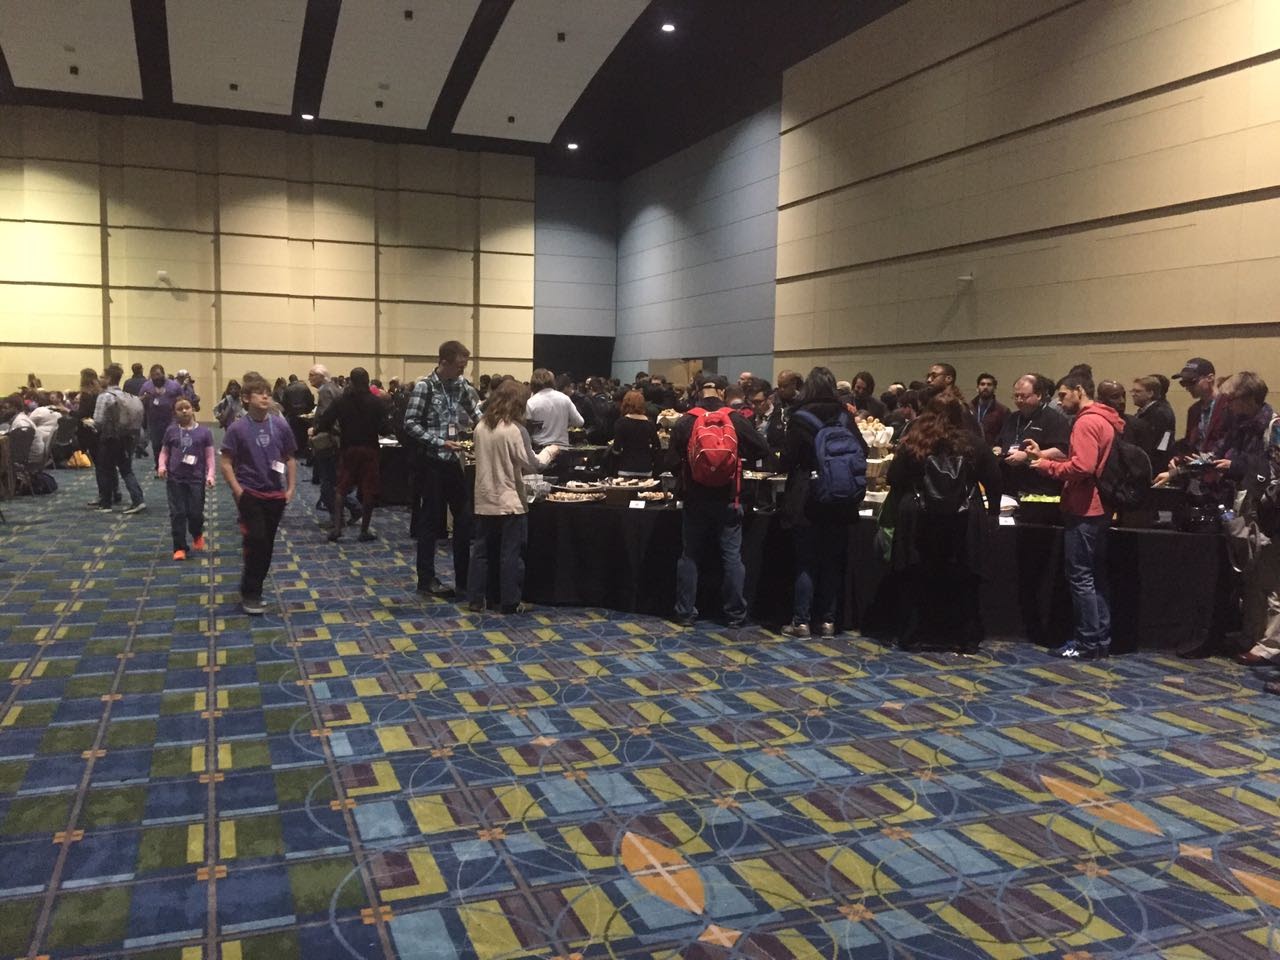 Registration opens on Day 1 of WCUS '16 at the Pennsylvania Convention Center